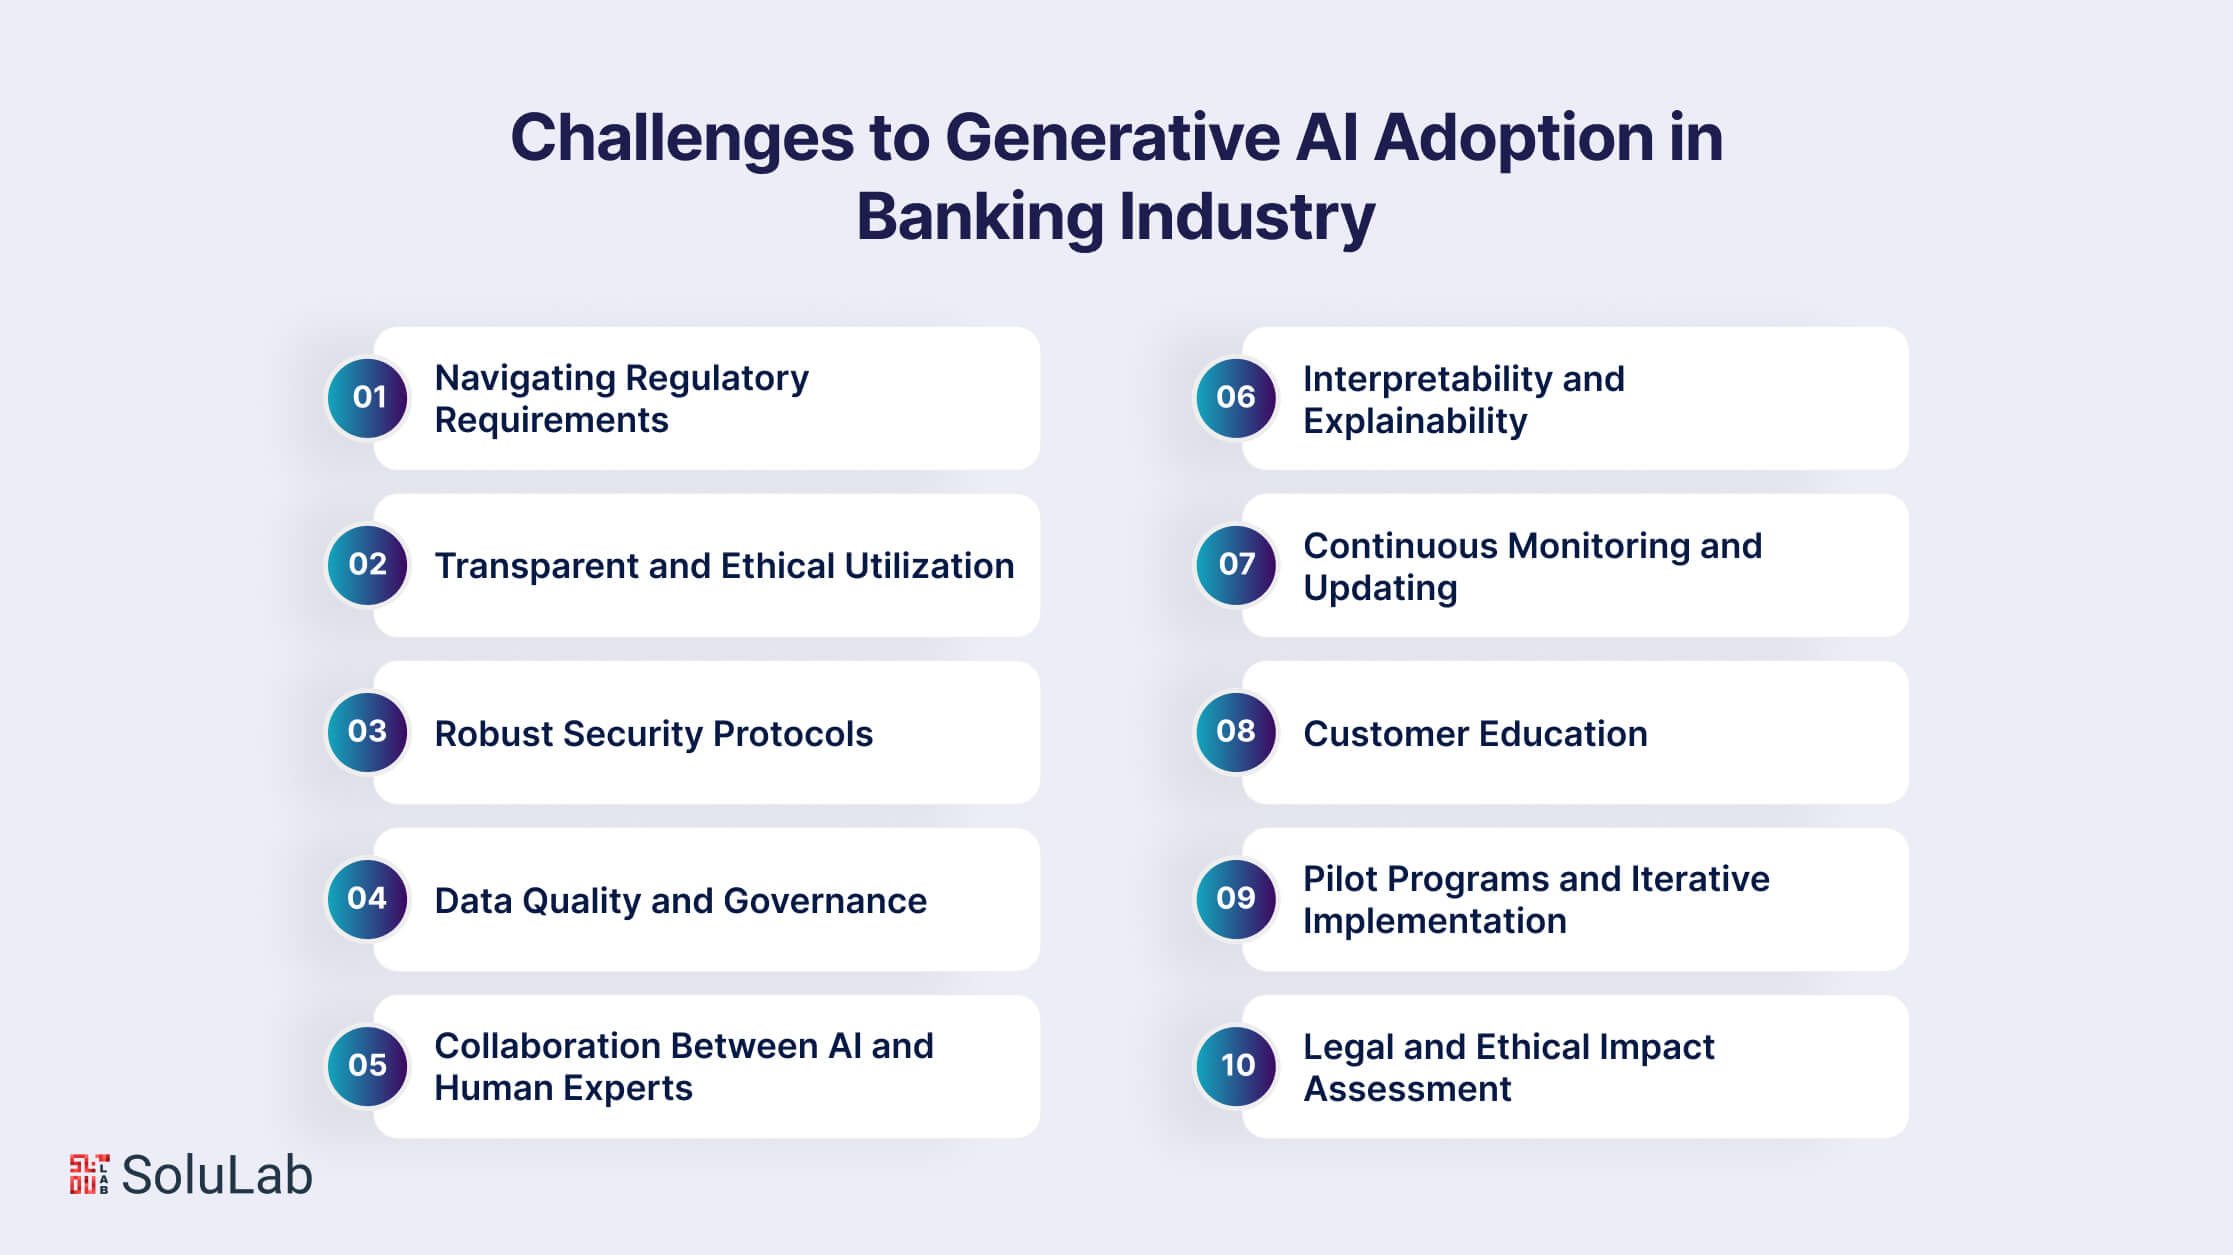 Challenges to Generative AI Adoption in the Banking Industry